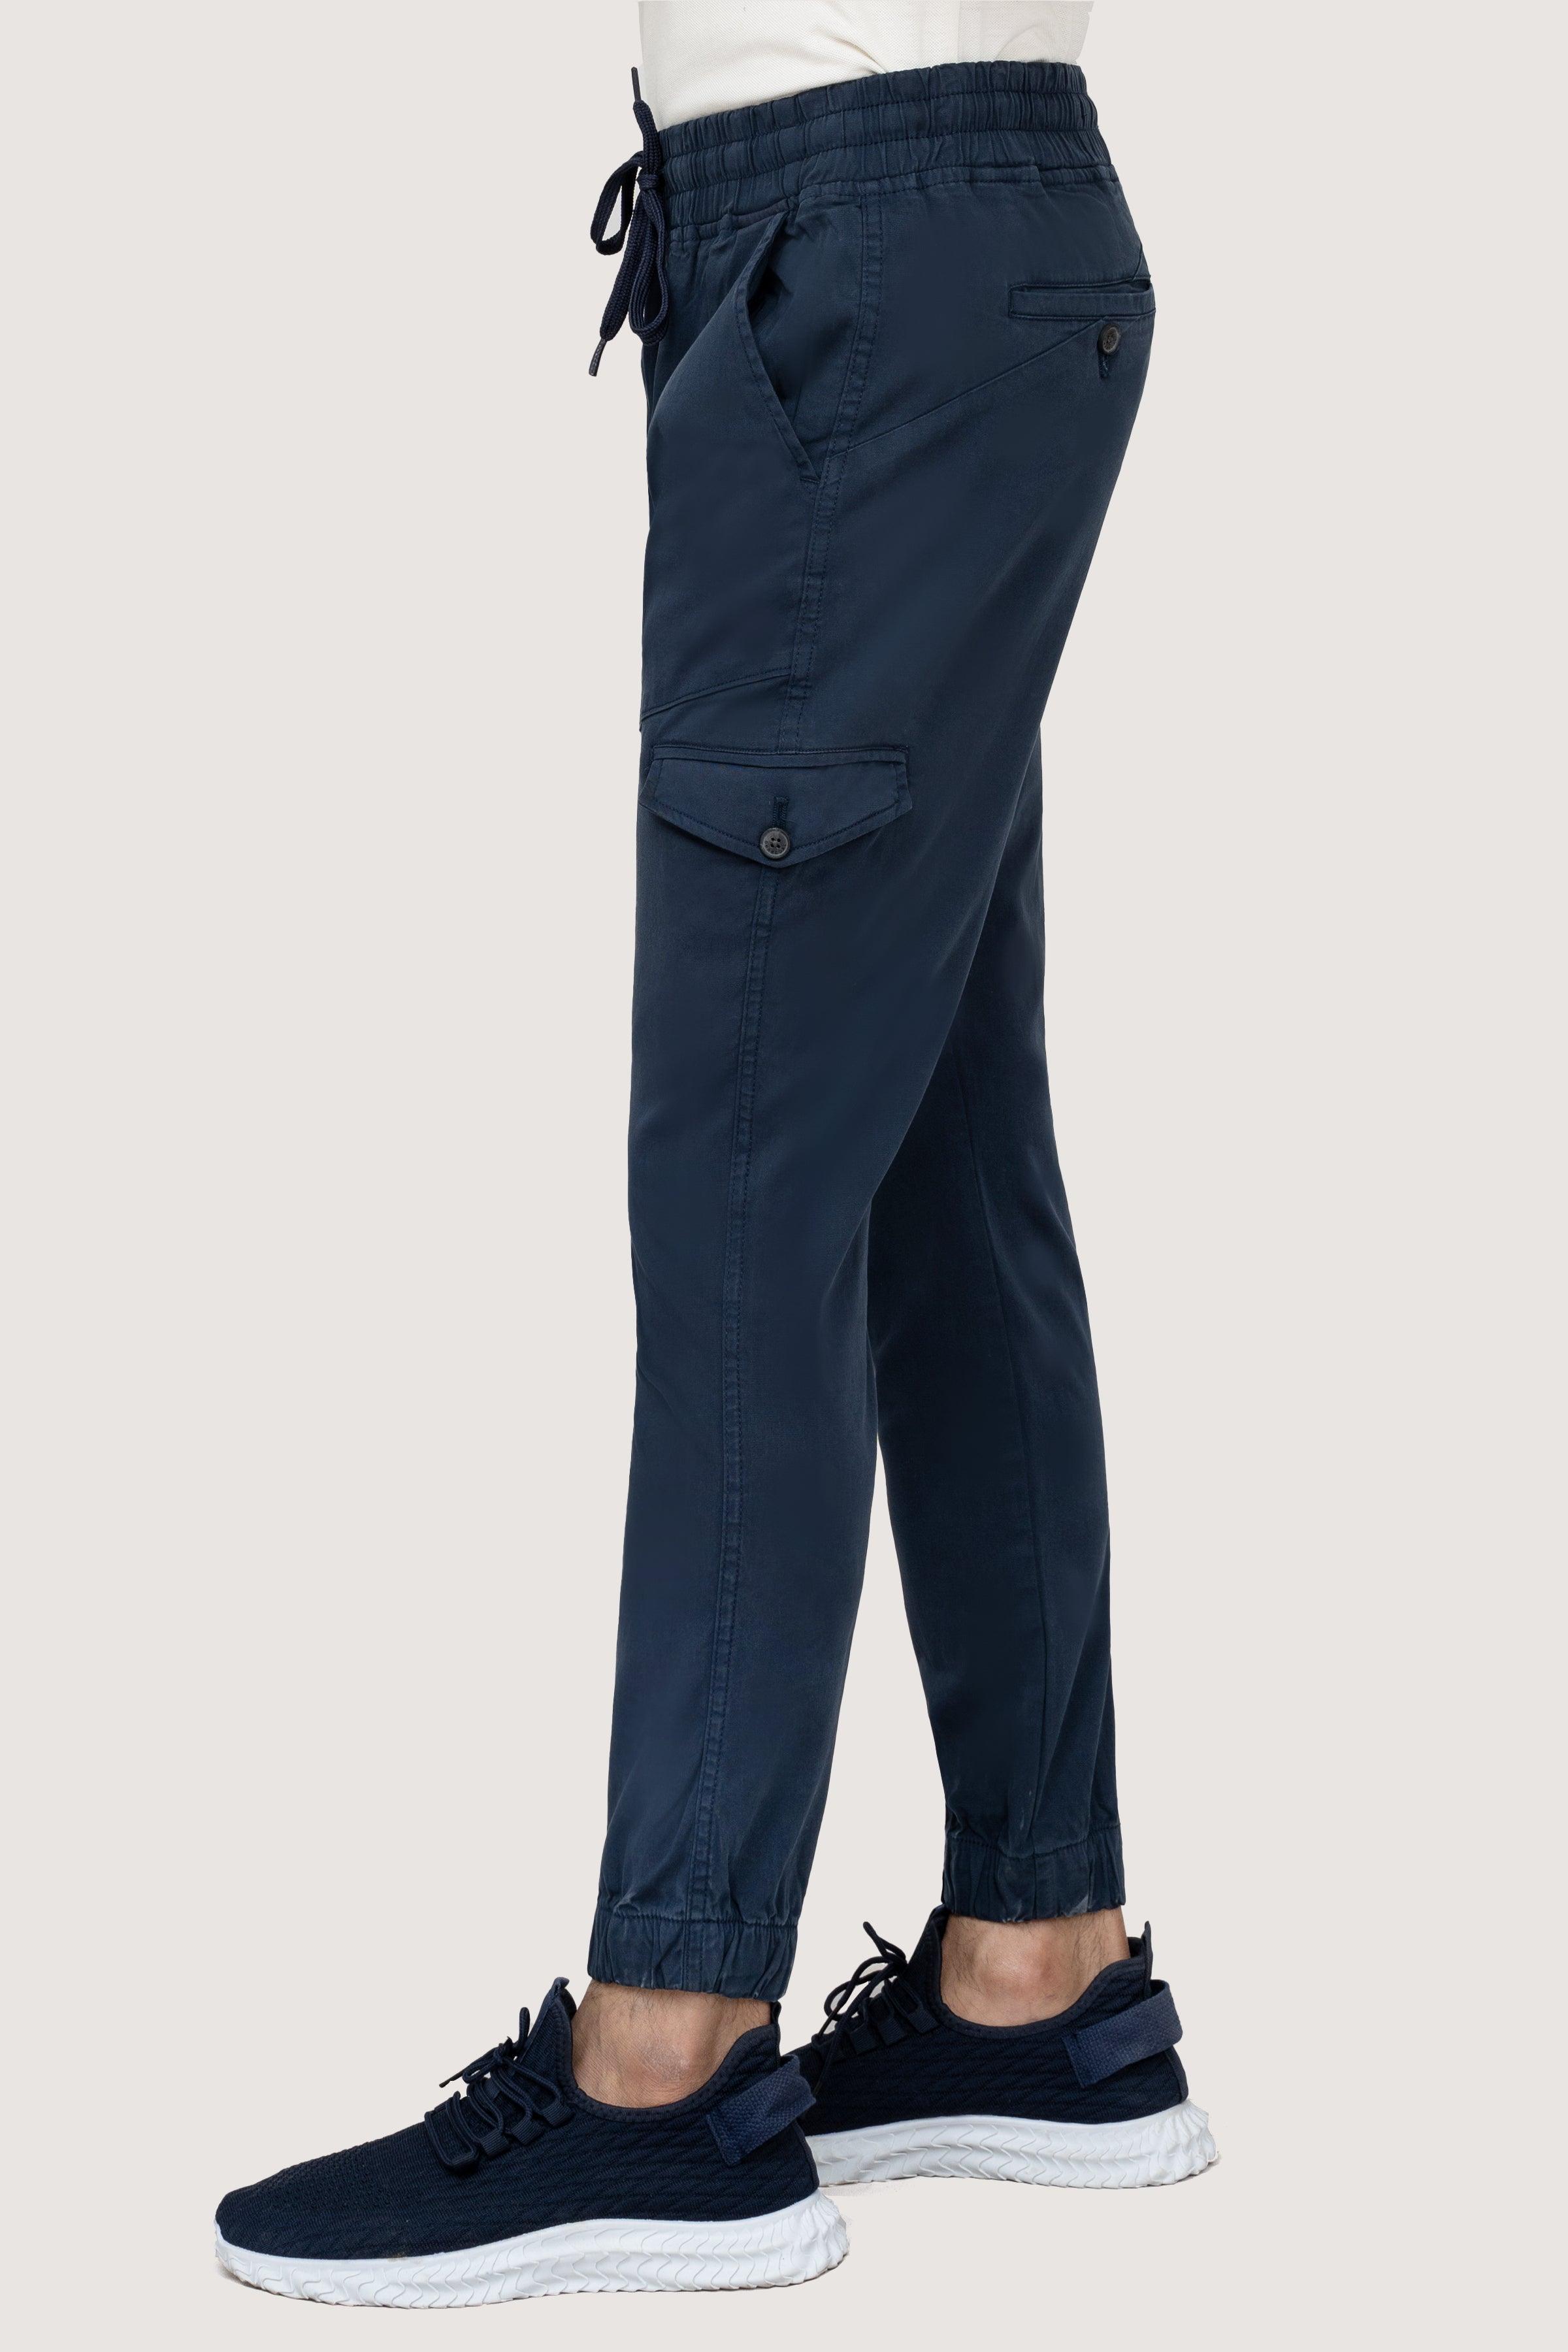 CASUAL JOGGER SLIMFIT TROUSER NAVY at Charcoal Clothing